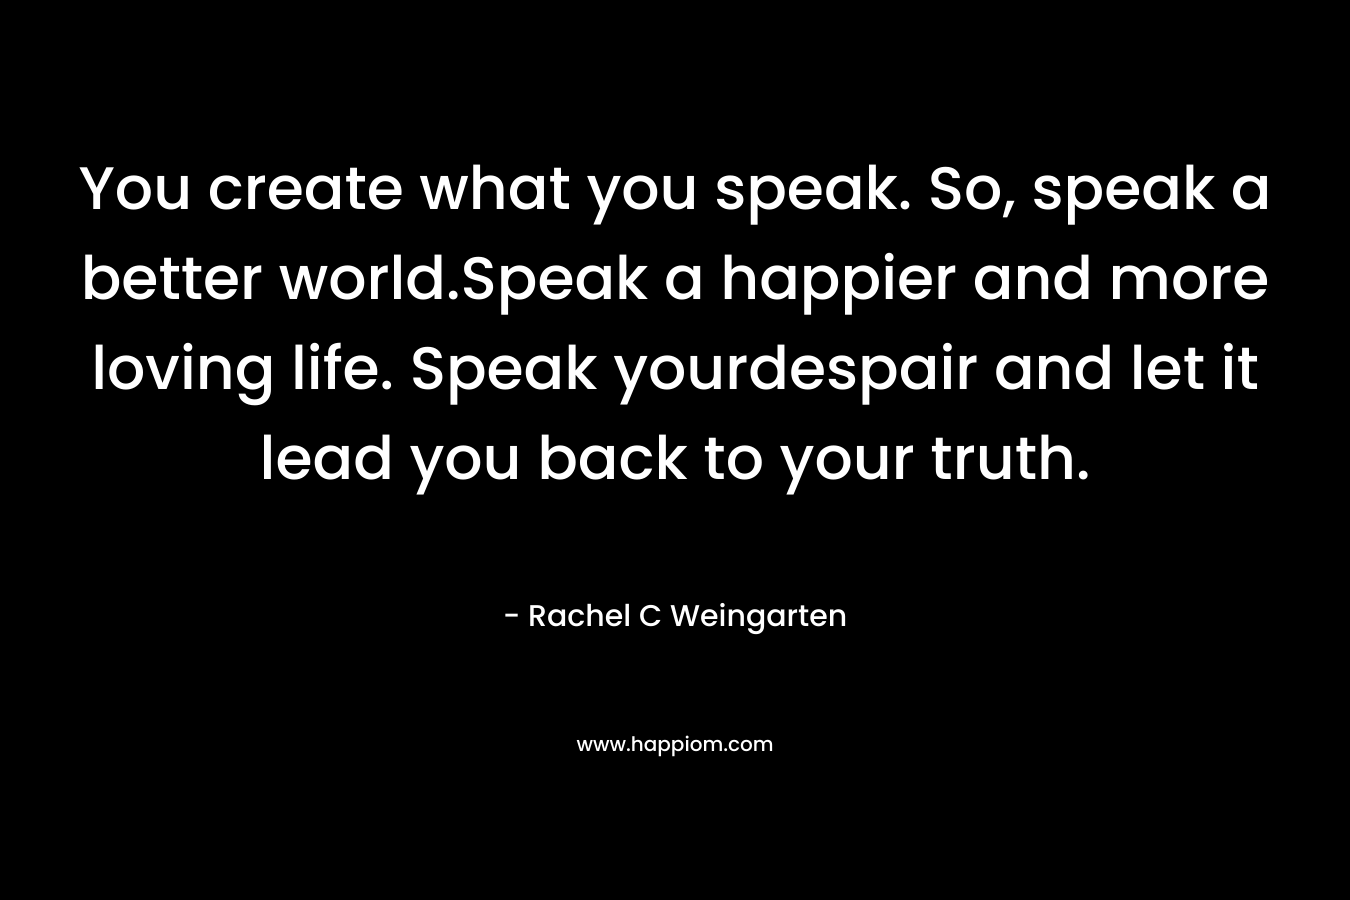 You create what you speak. So, speak a better world.Speak a happier and more loving life. Speak yourdespair and let it lead you back to your truth.